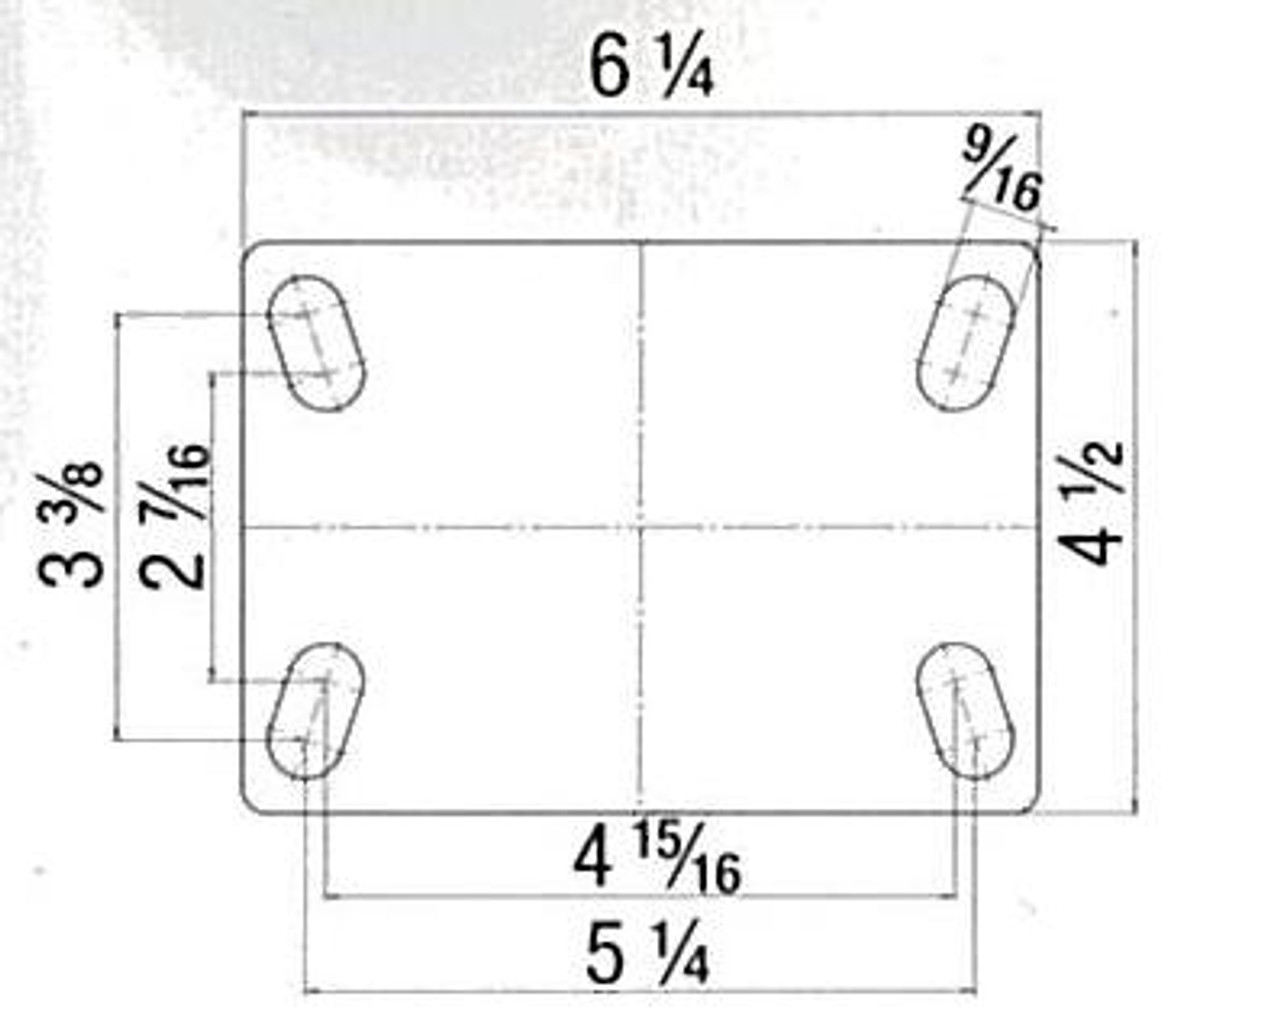 BSFE-SE 200K-16 Blickle 8" Top Plate Dimensions